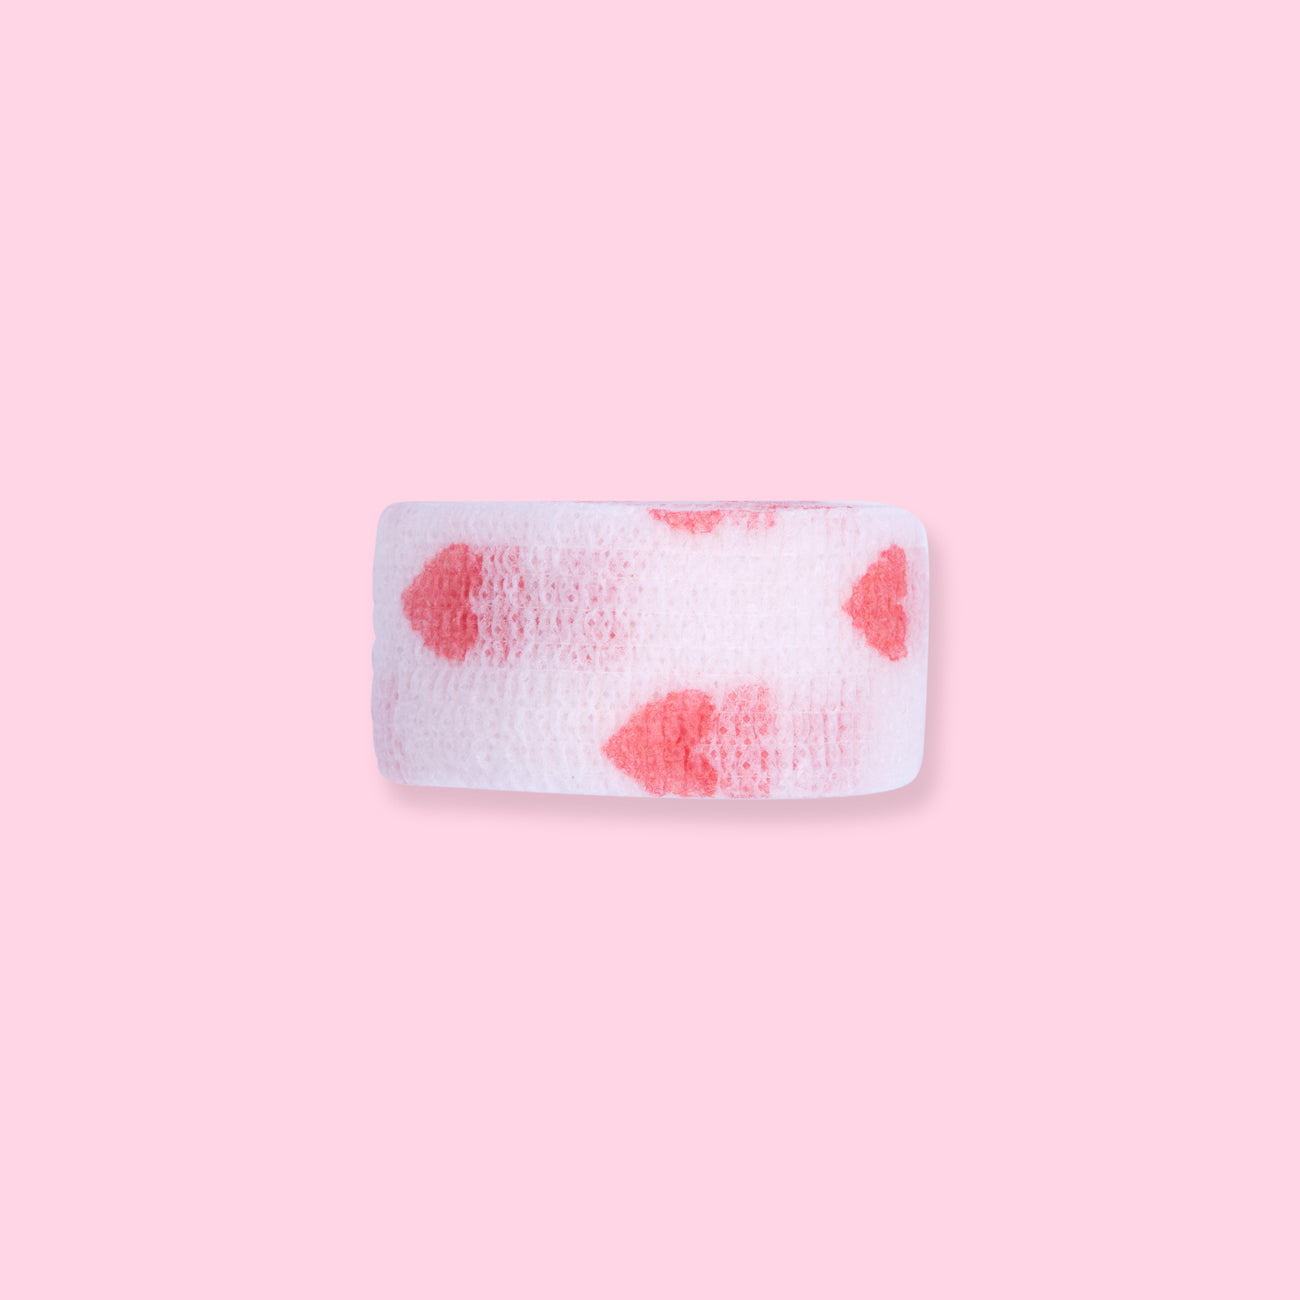 Bandages Aesthetic Wallpapers